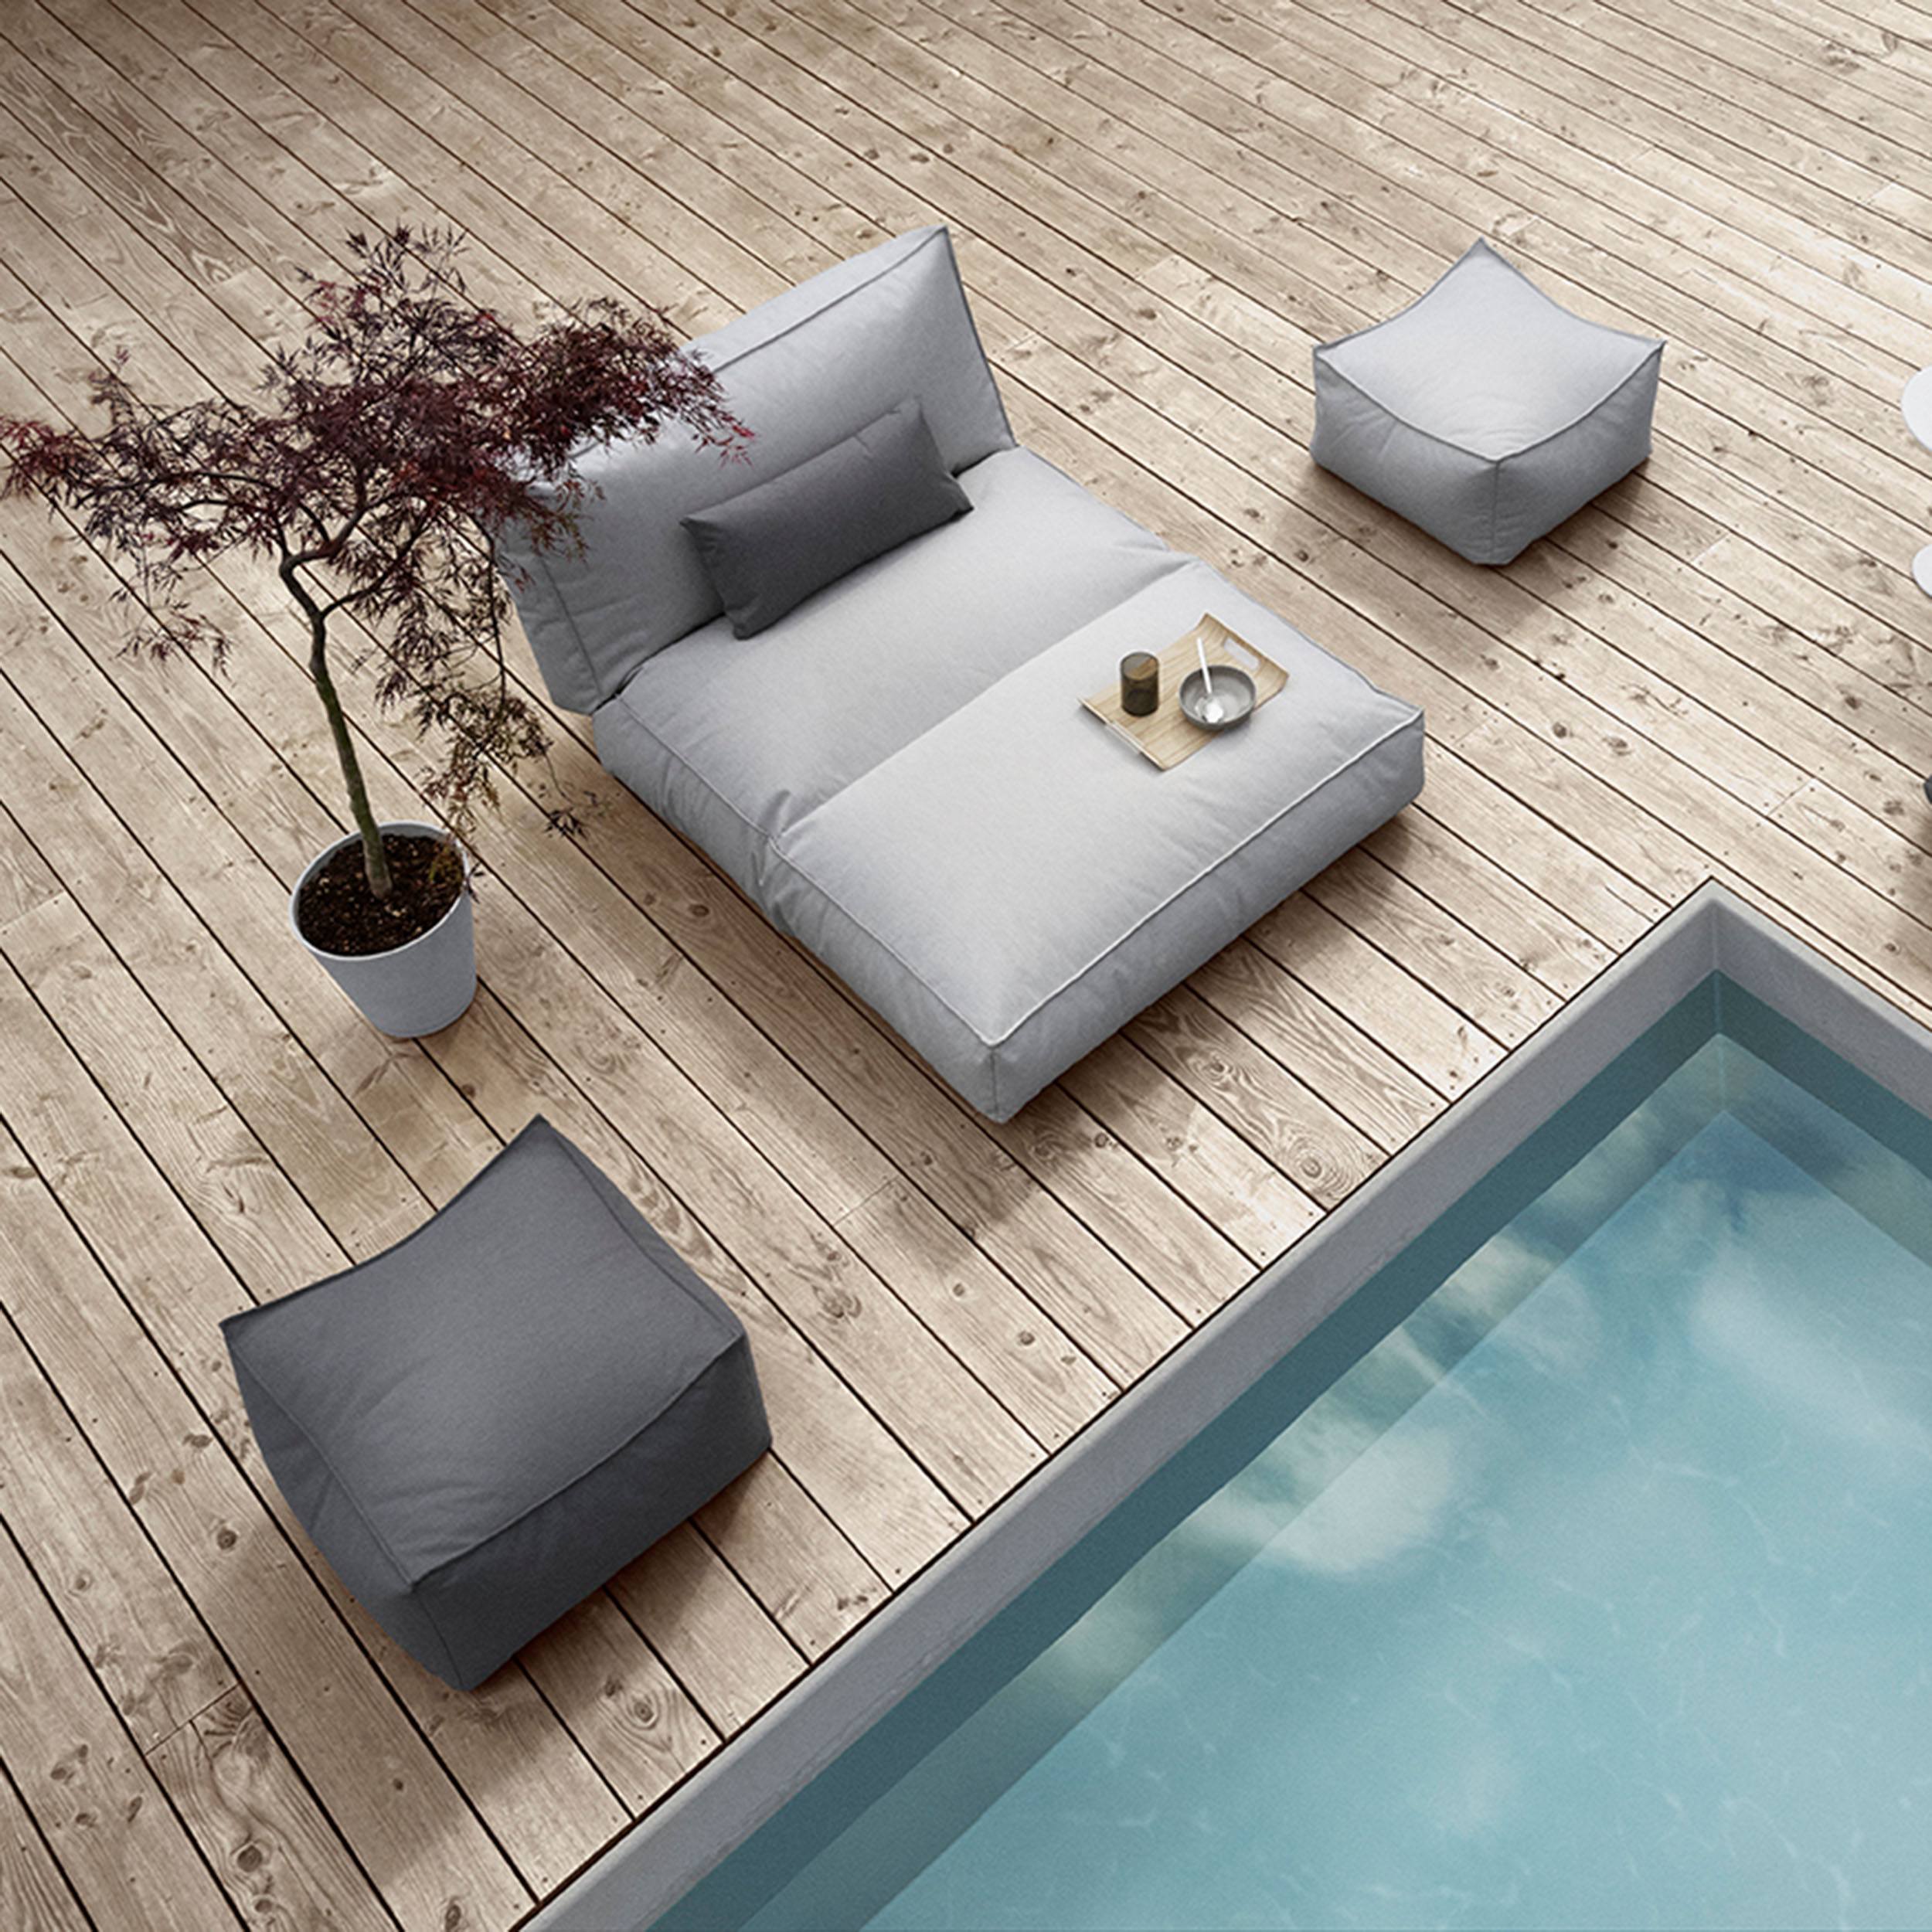 Stay Lounger Outdoor Pouf